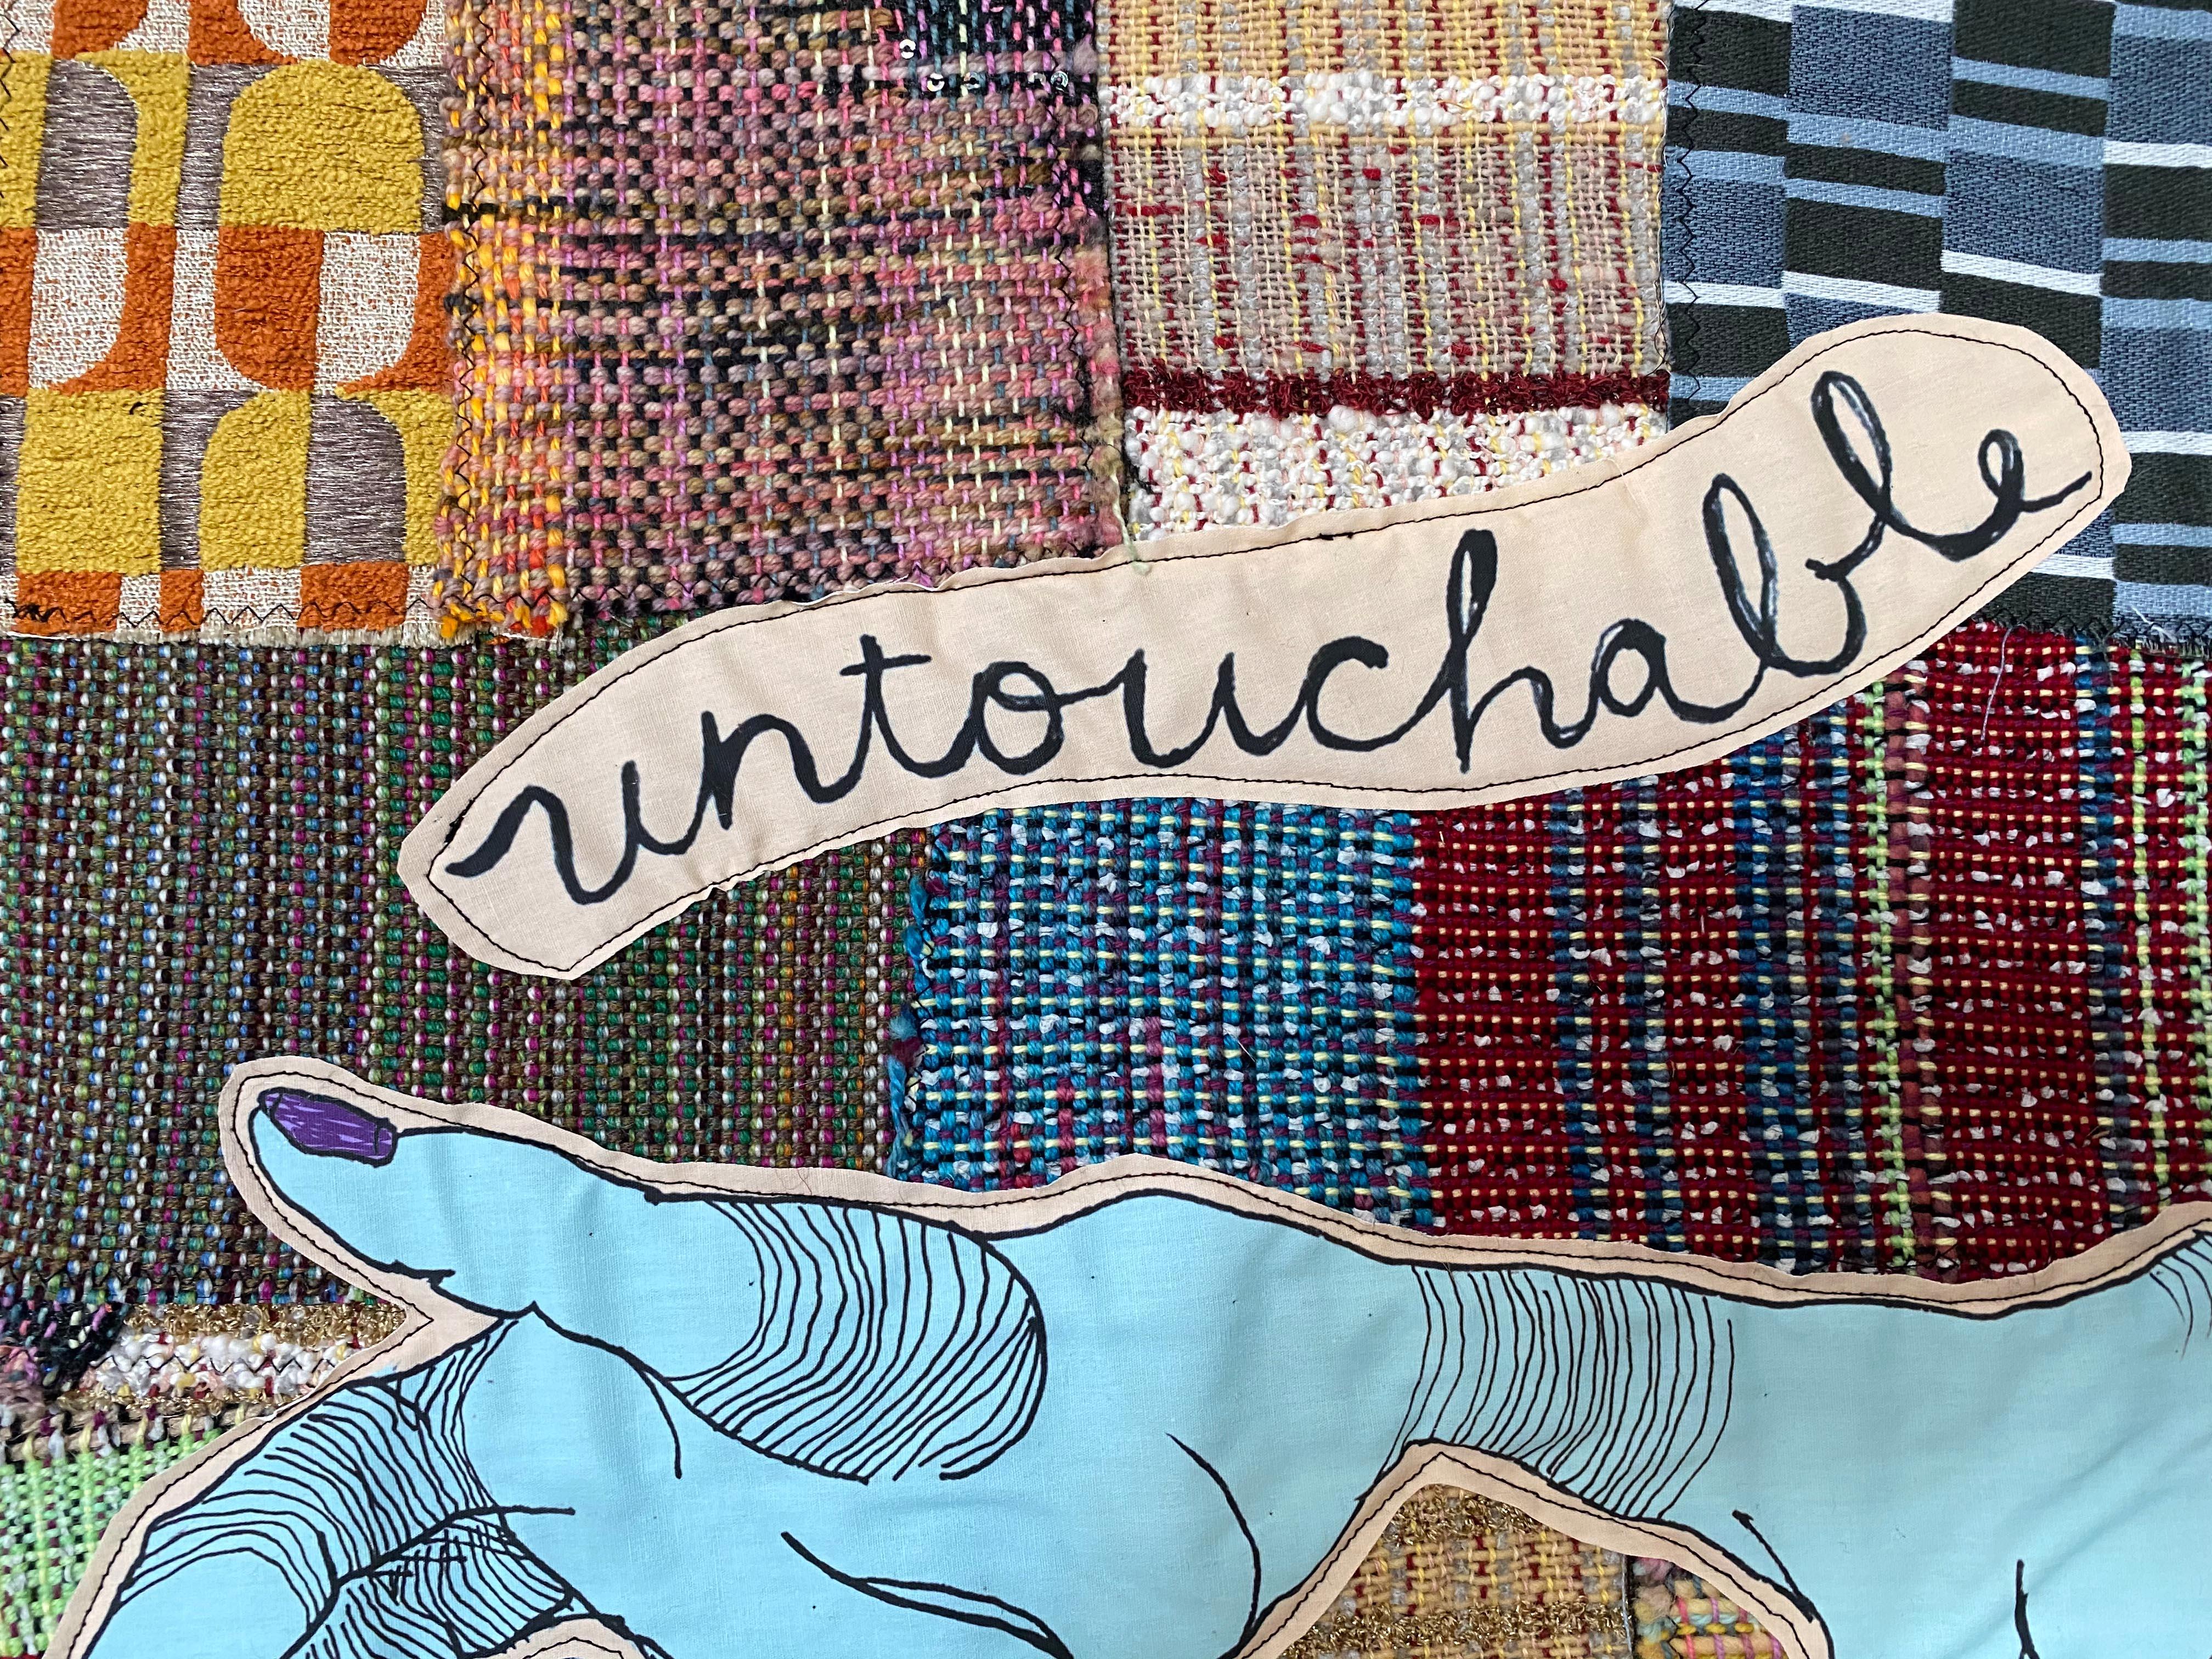 Textile wall hanging: 'Untouchable' - Painting by Juliet Martin